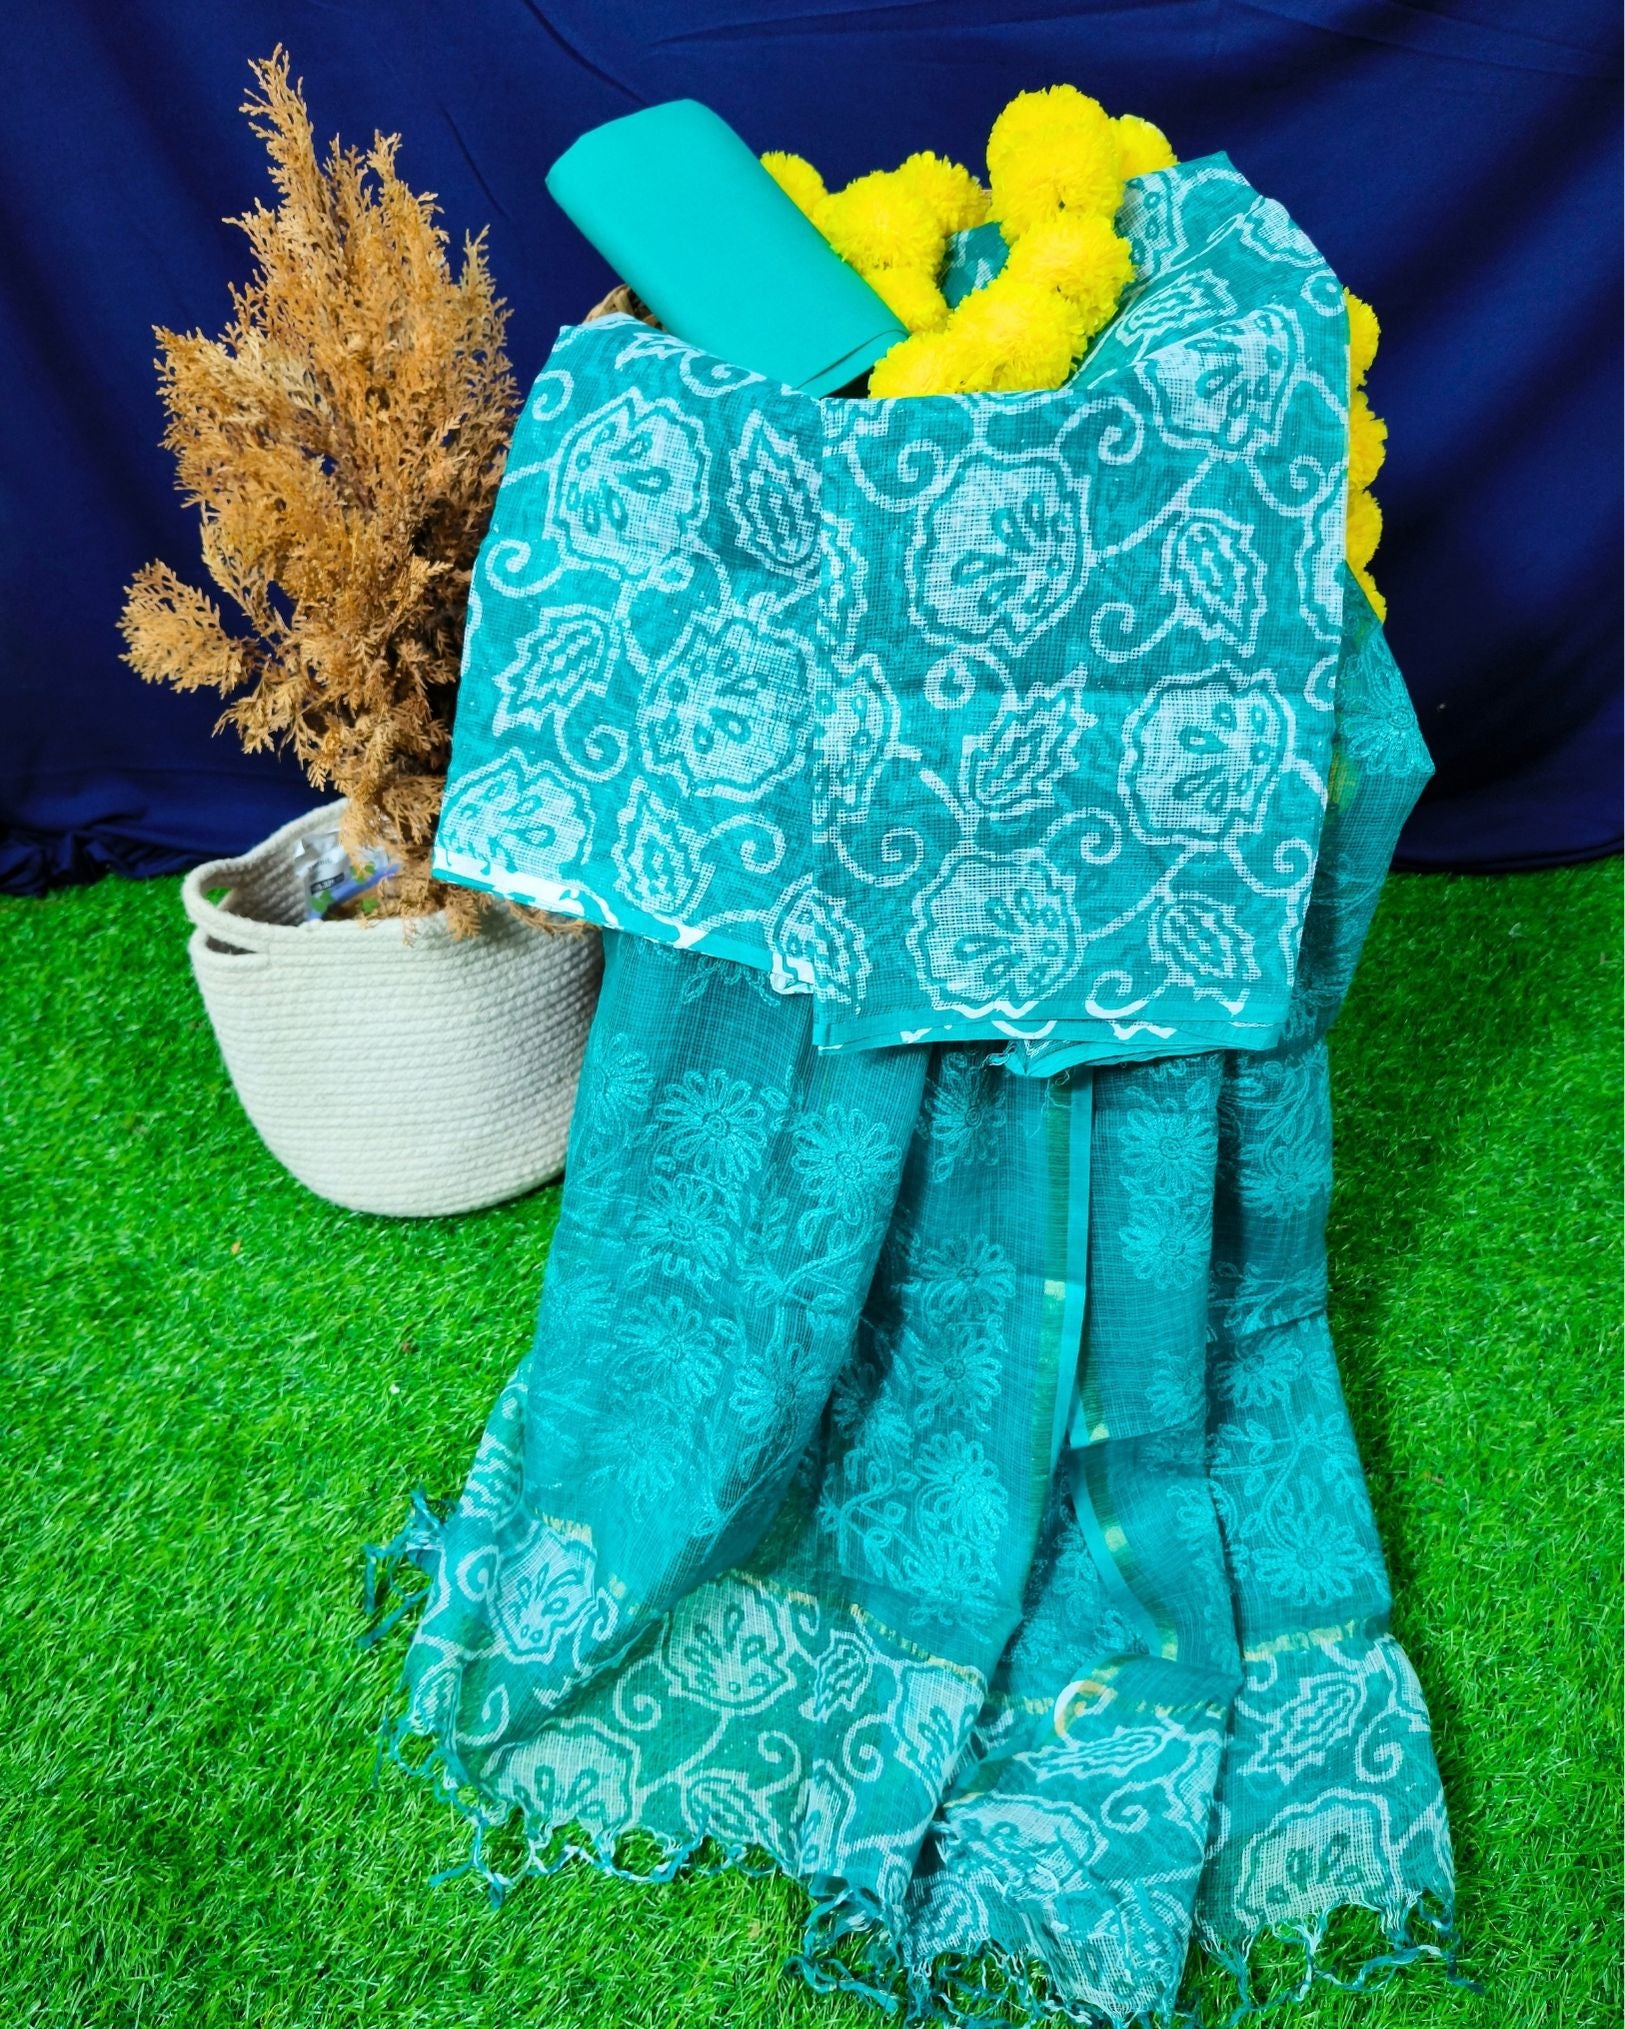 Pure Cotton Kota Doria Suit (Top+Bottom+Dupatta) Teal Green Color with heavy embroidered Dupatta - IndieHaat